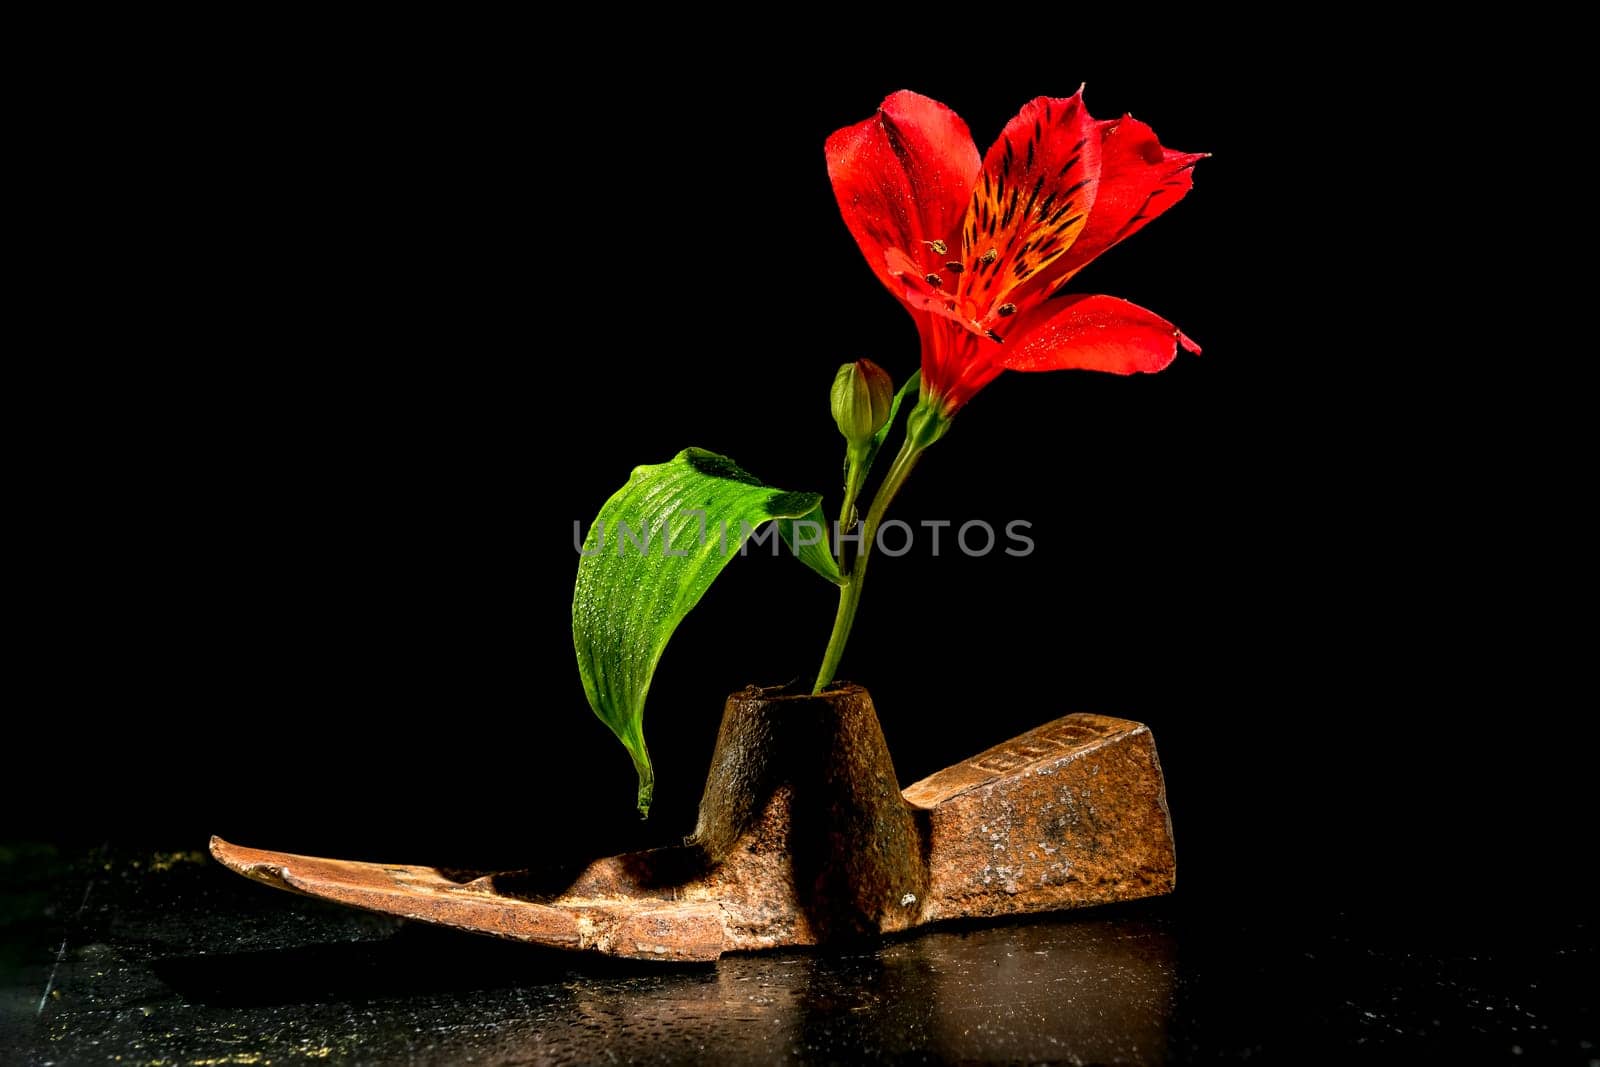 Old rusty metal tool and red flower on a black background by Multipedia